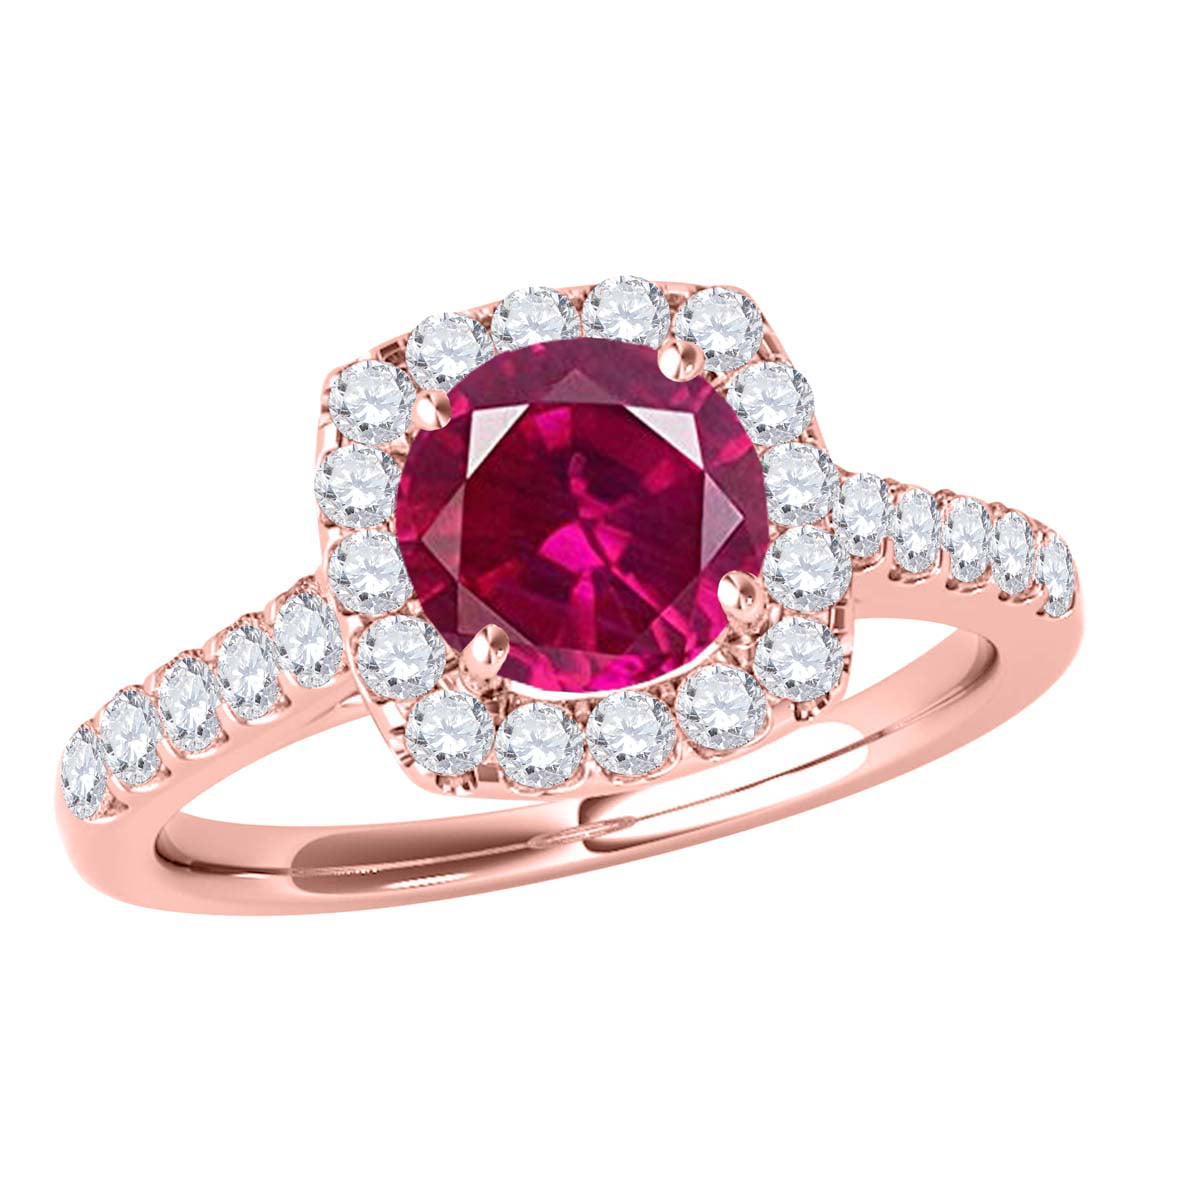 Mauli Jewels Engagement Rings for Women 1.35 Carat Halo Created Ruby ...